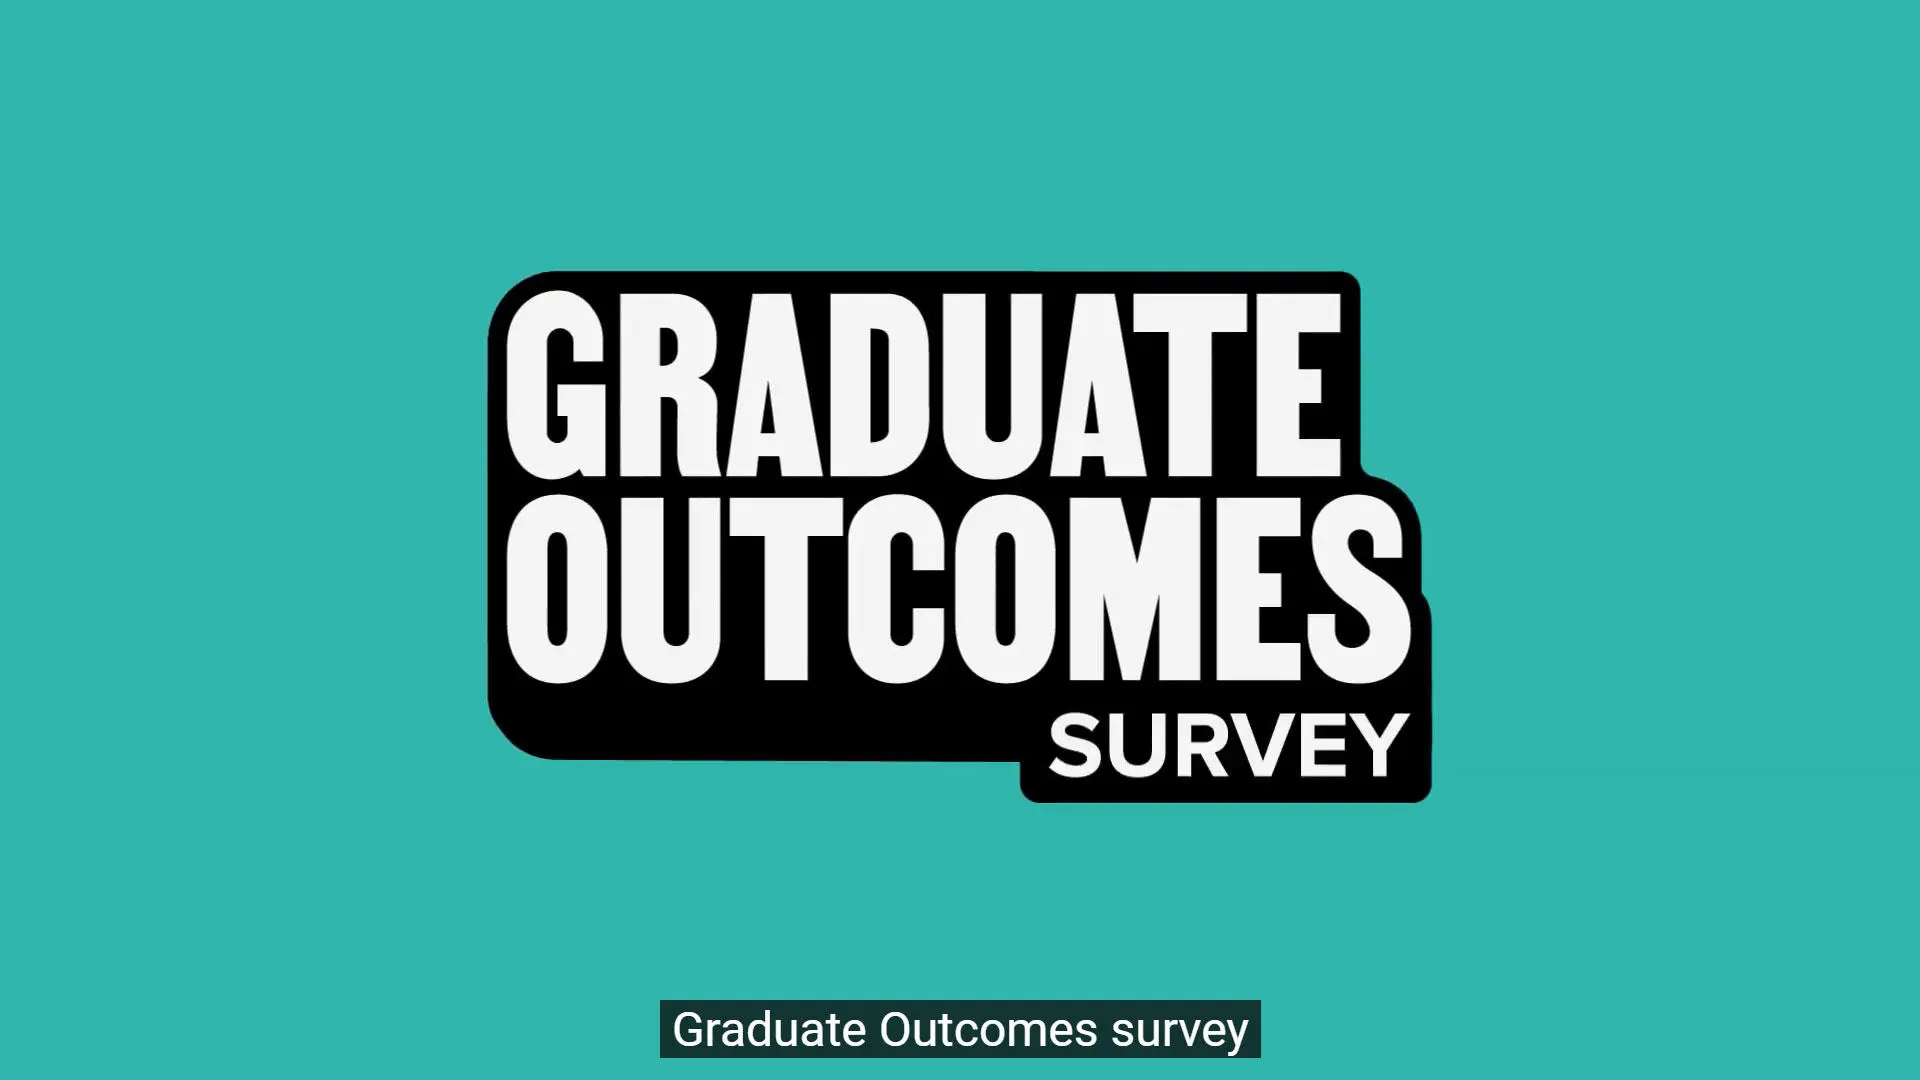 Screen shot showing 'graduate outcomes survey' text on a teal background